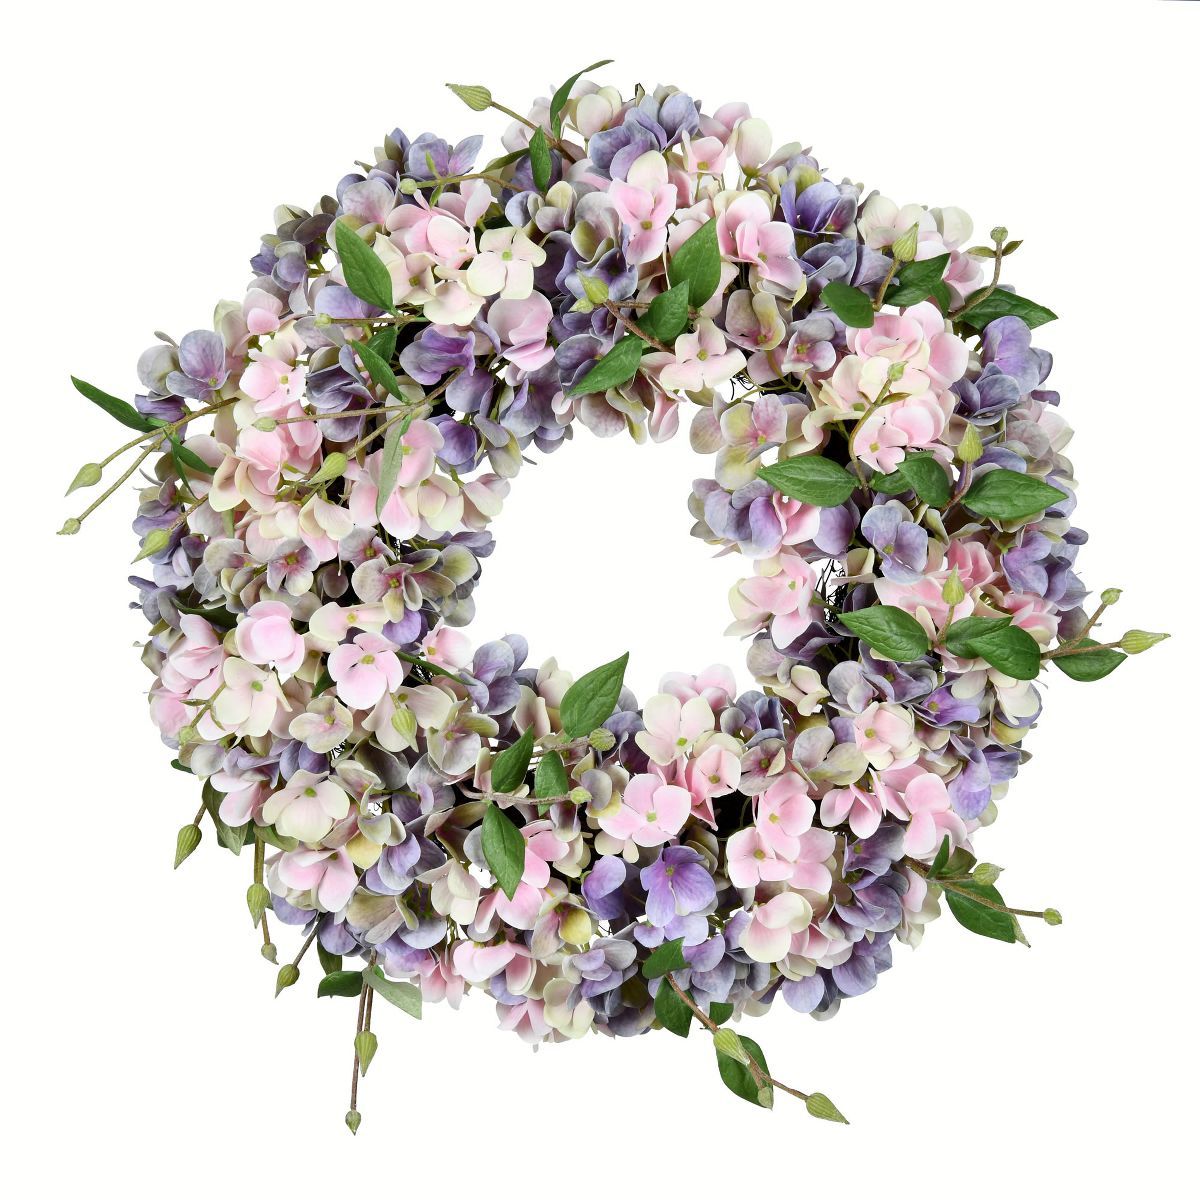 Vickerman 18" Artificial Blue and Pink Hydrangea Wreath. | Target